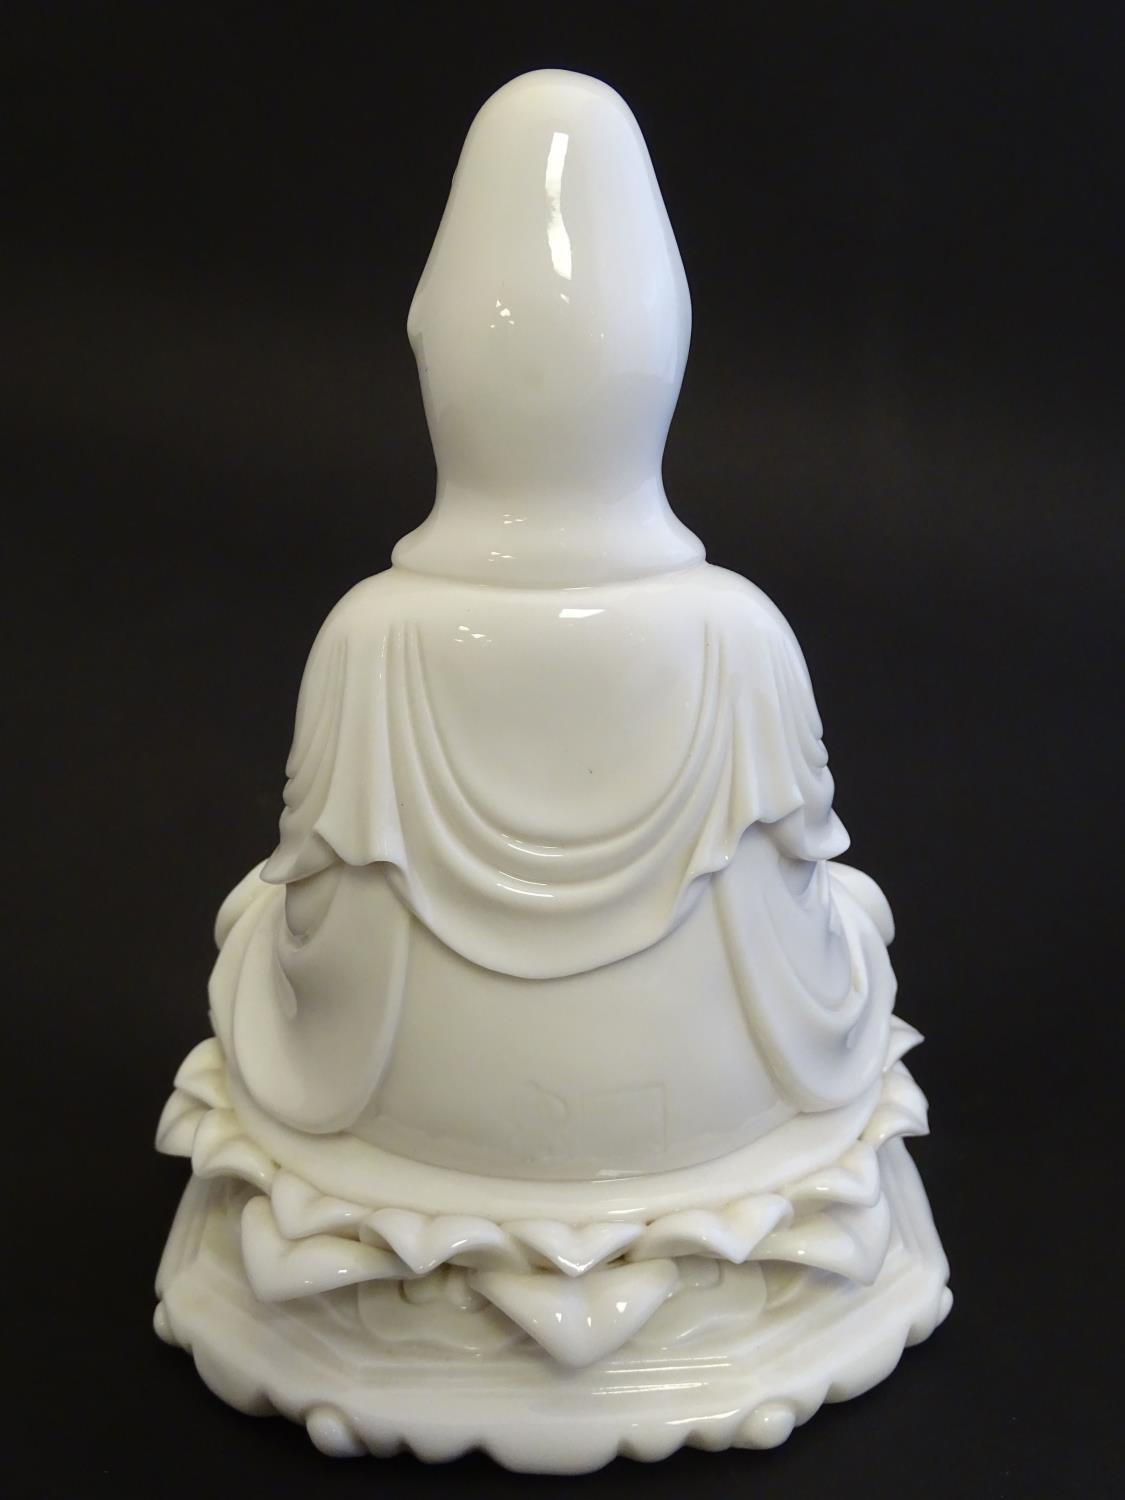 A Chinese blanc de chine figure depicting Guanyin seated on a lotus flower base. Approx. 7 1/2" high - Image 16 of 16